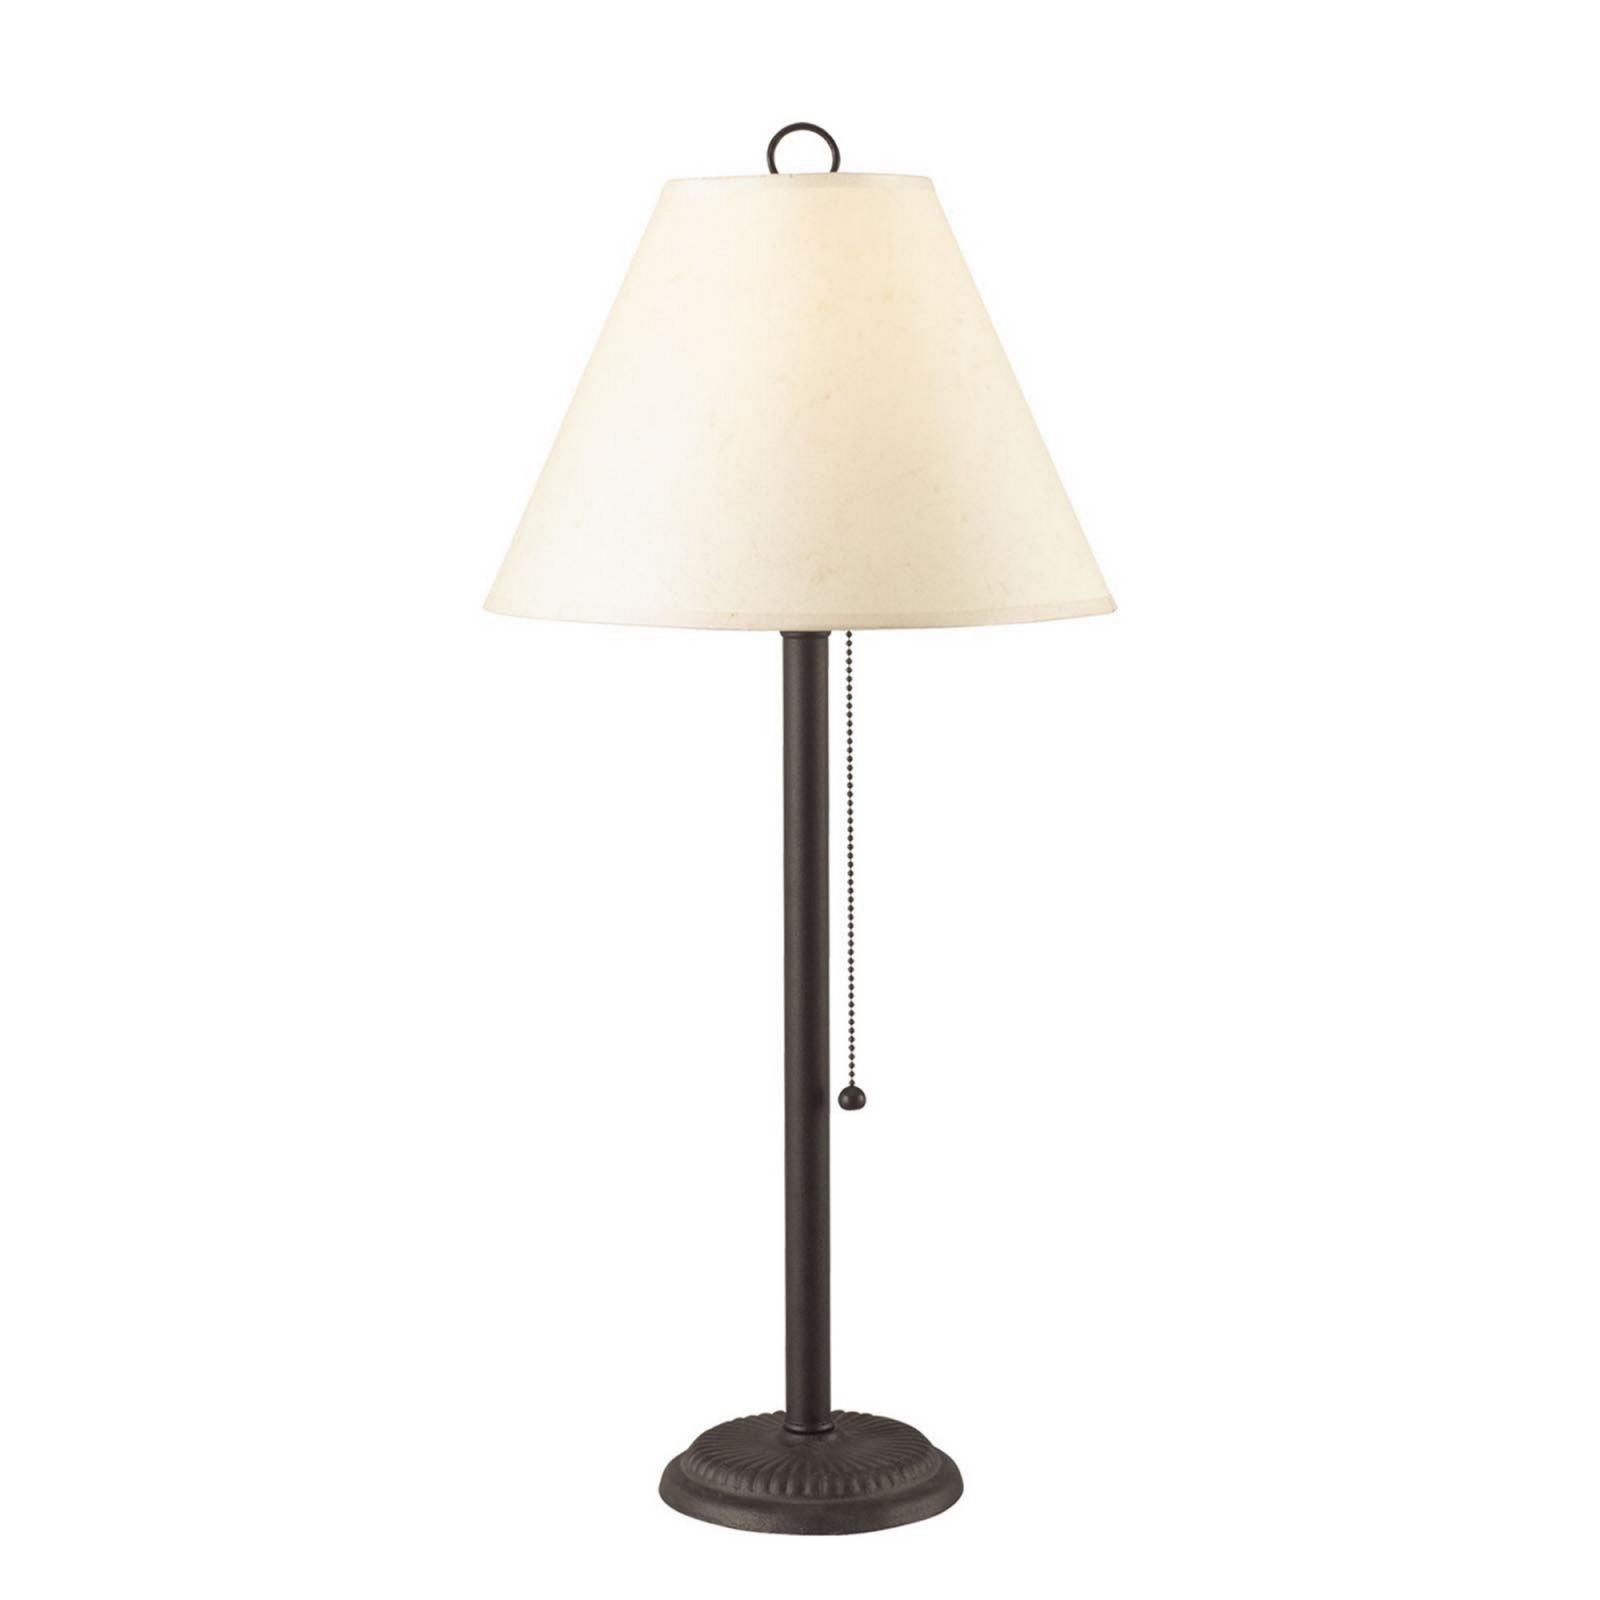 Paper Shade Metal Table Lamp With Pull Chain Switch,Set Of 4,White And Black By Benzara